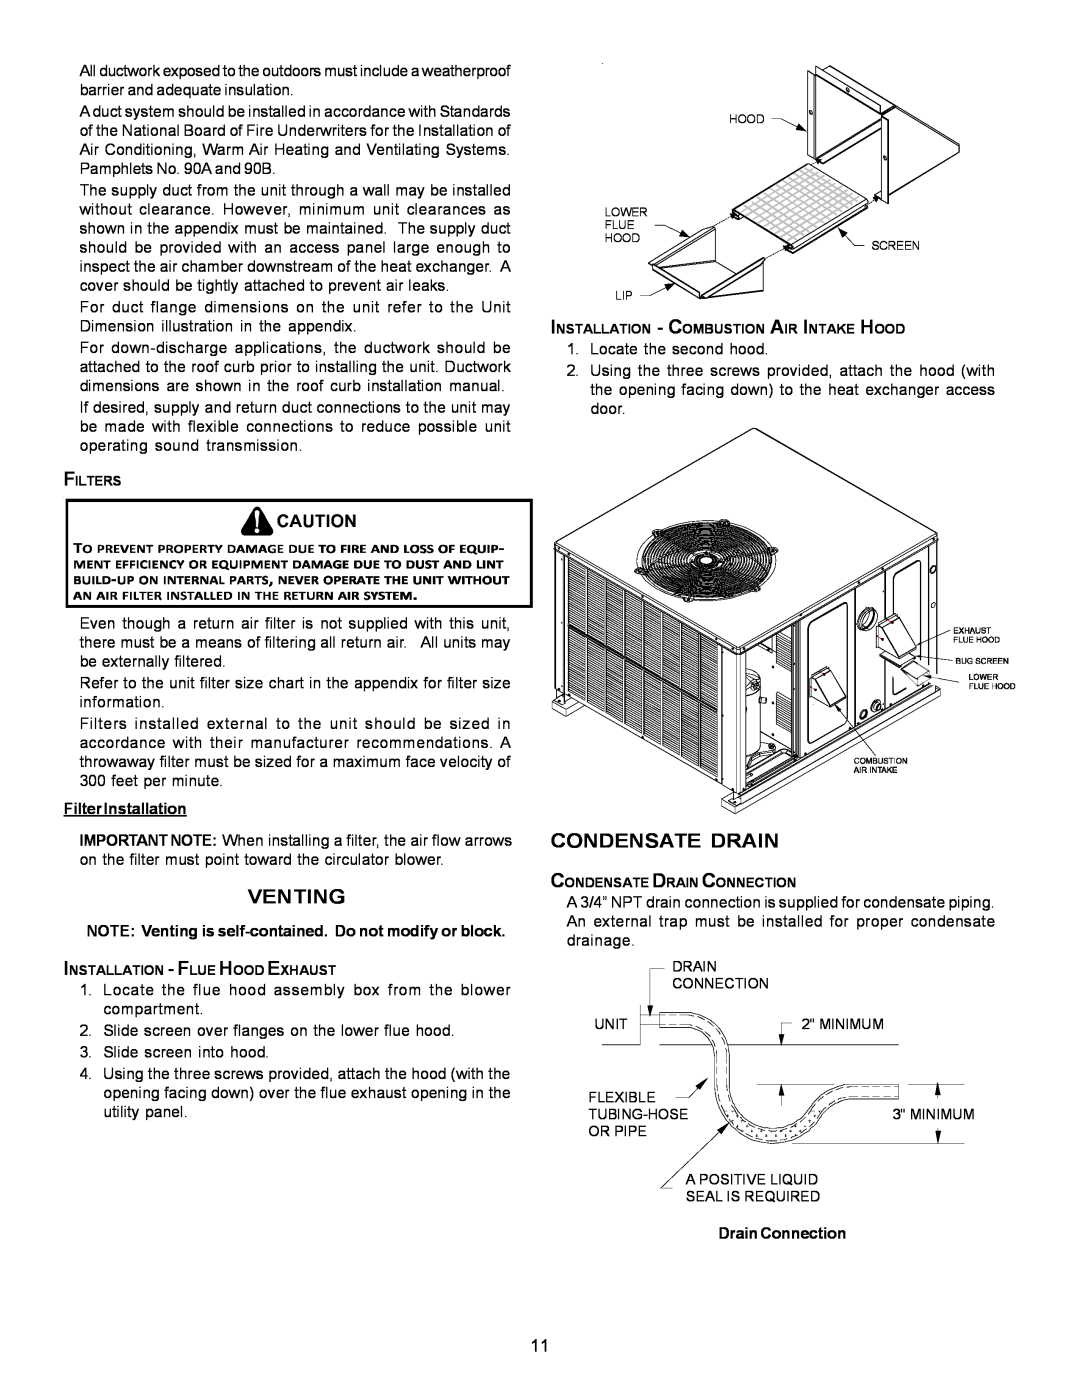 Goodman Mfg PG 15 specifications Venting, Condensate Drain, Filter Installation, Drain Connection 